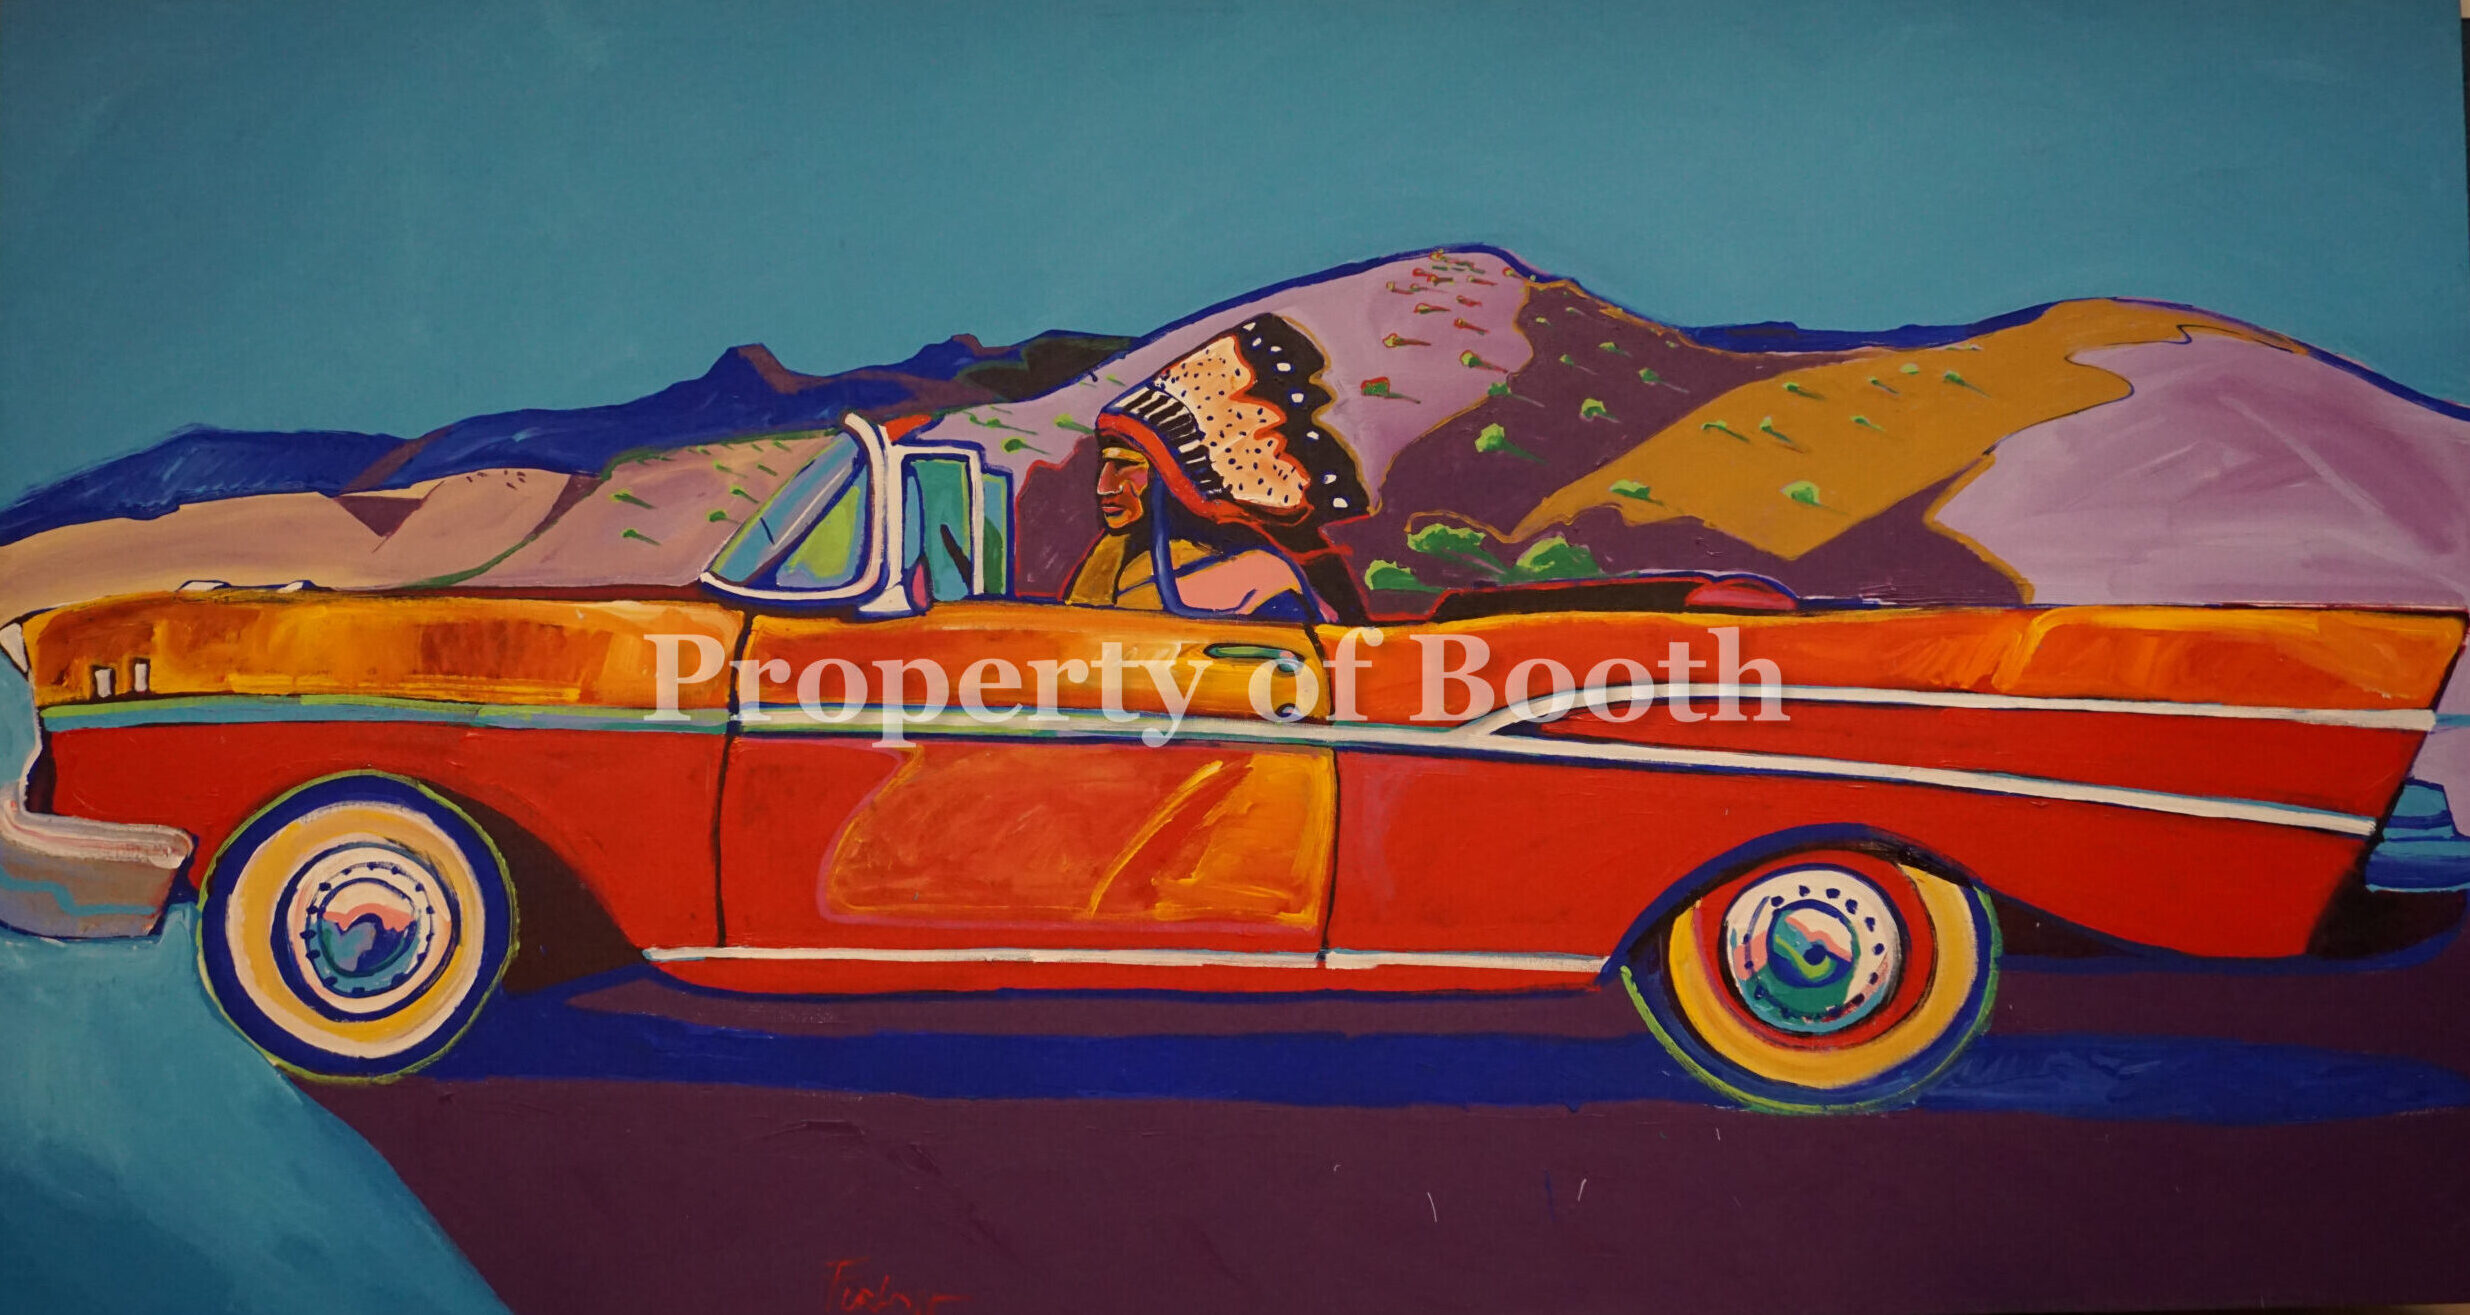 © Malcolm Furlow, Chief in the Car, n.d., acrylic on canvas, 48 x 90", Gift of Mary Carole Cooney and Henry Bauer